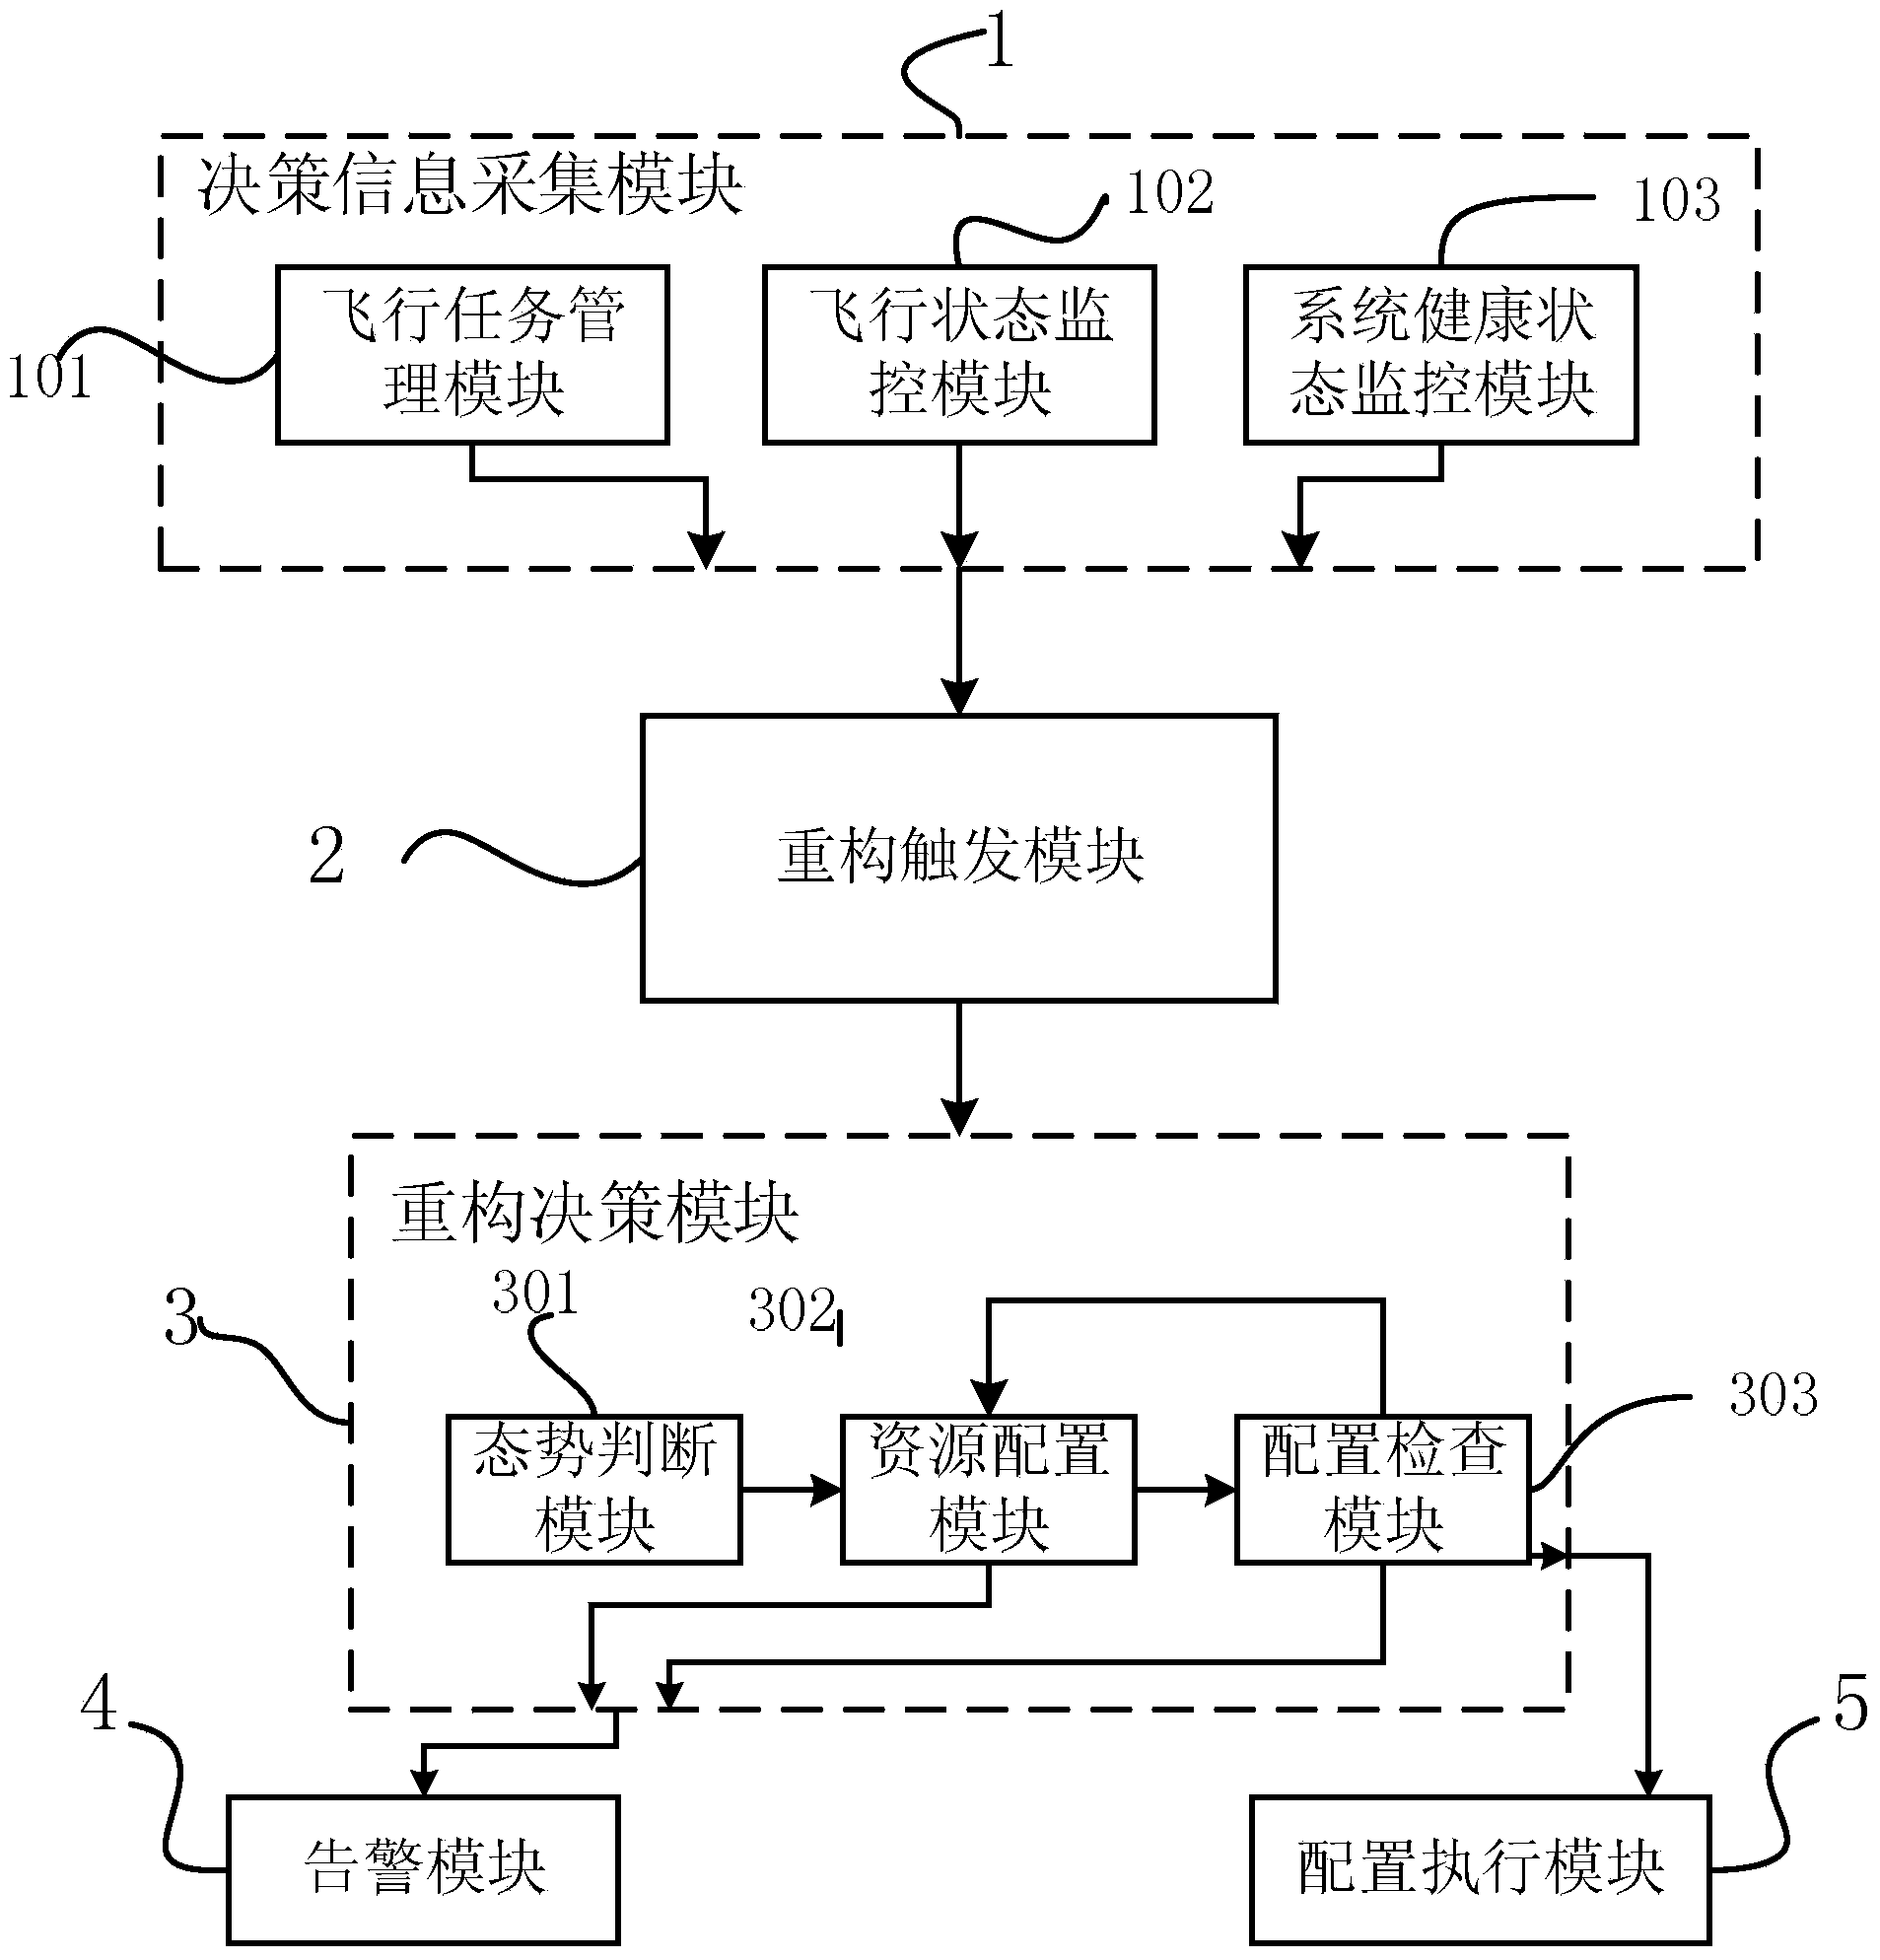 Reconstruction decision-making system and decision making method for comprehensive modularized avionics system